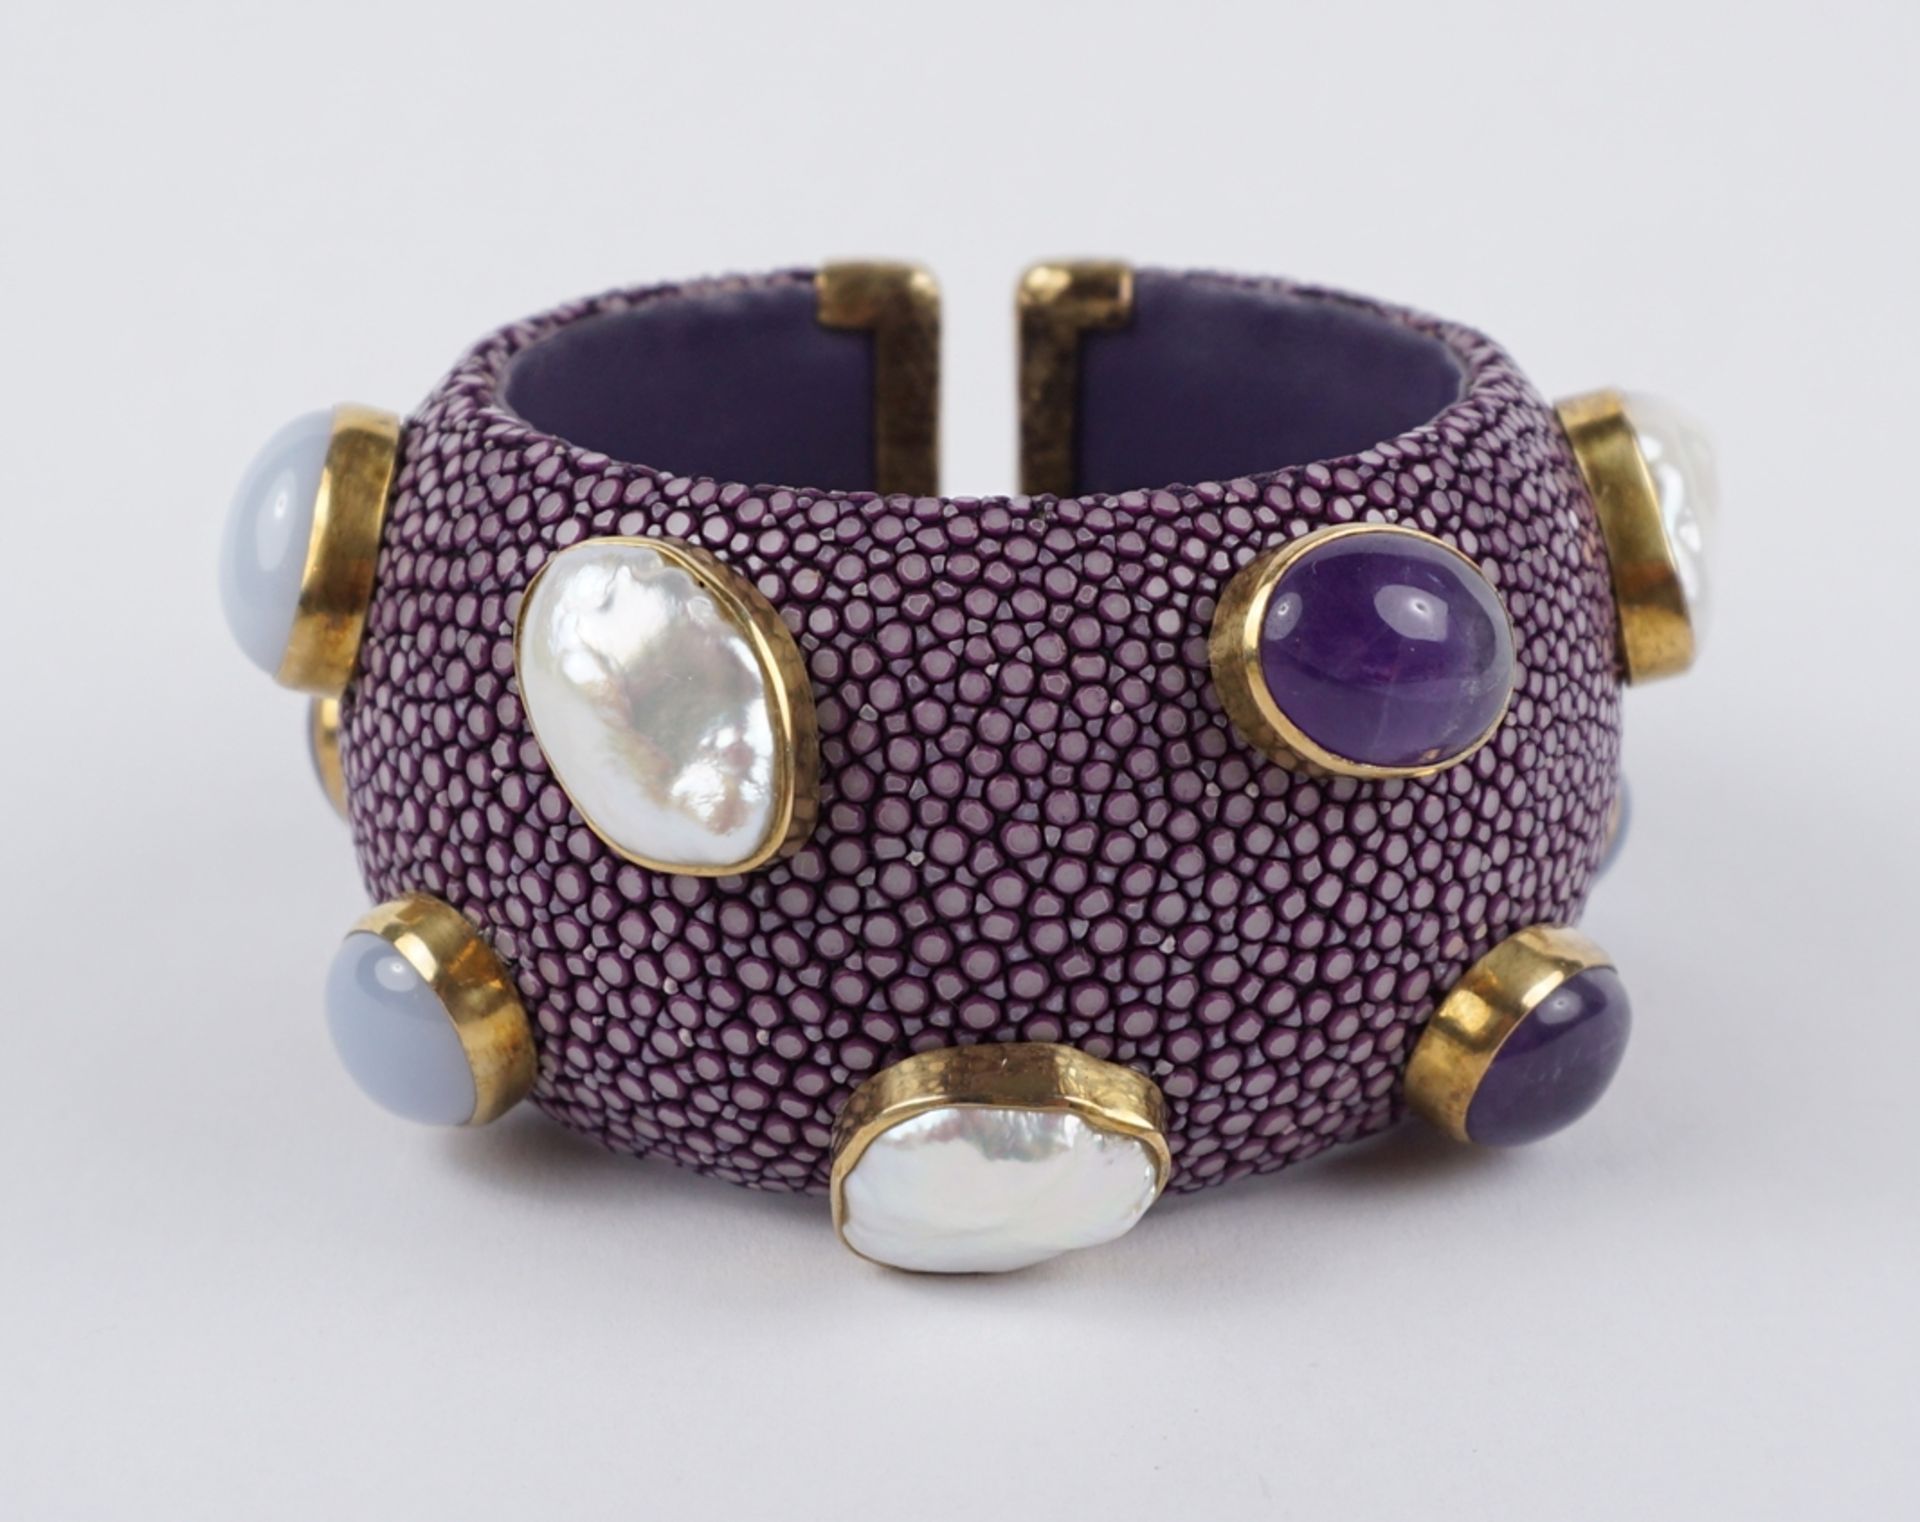 Shagreen cuff bracelet in plum violet, from the Caraboque collection by Anna Blum